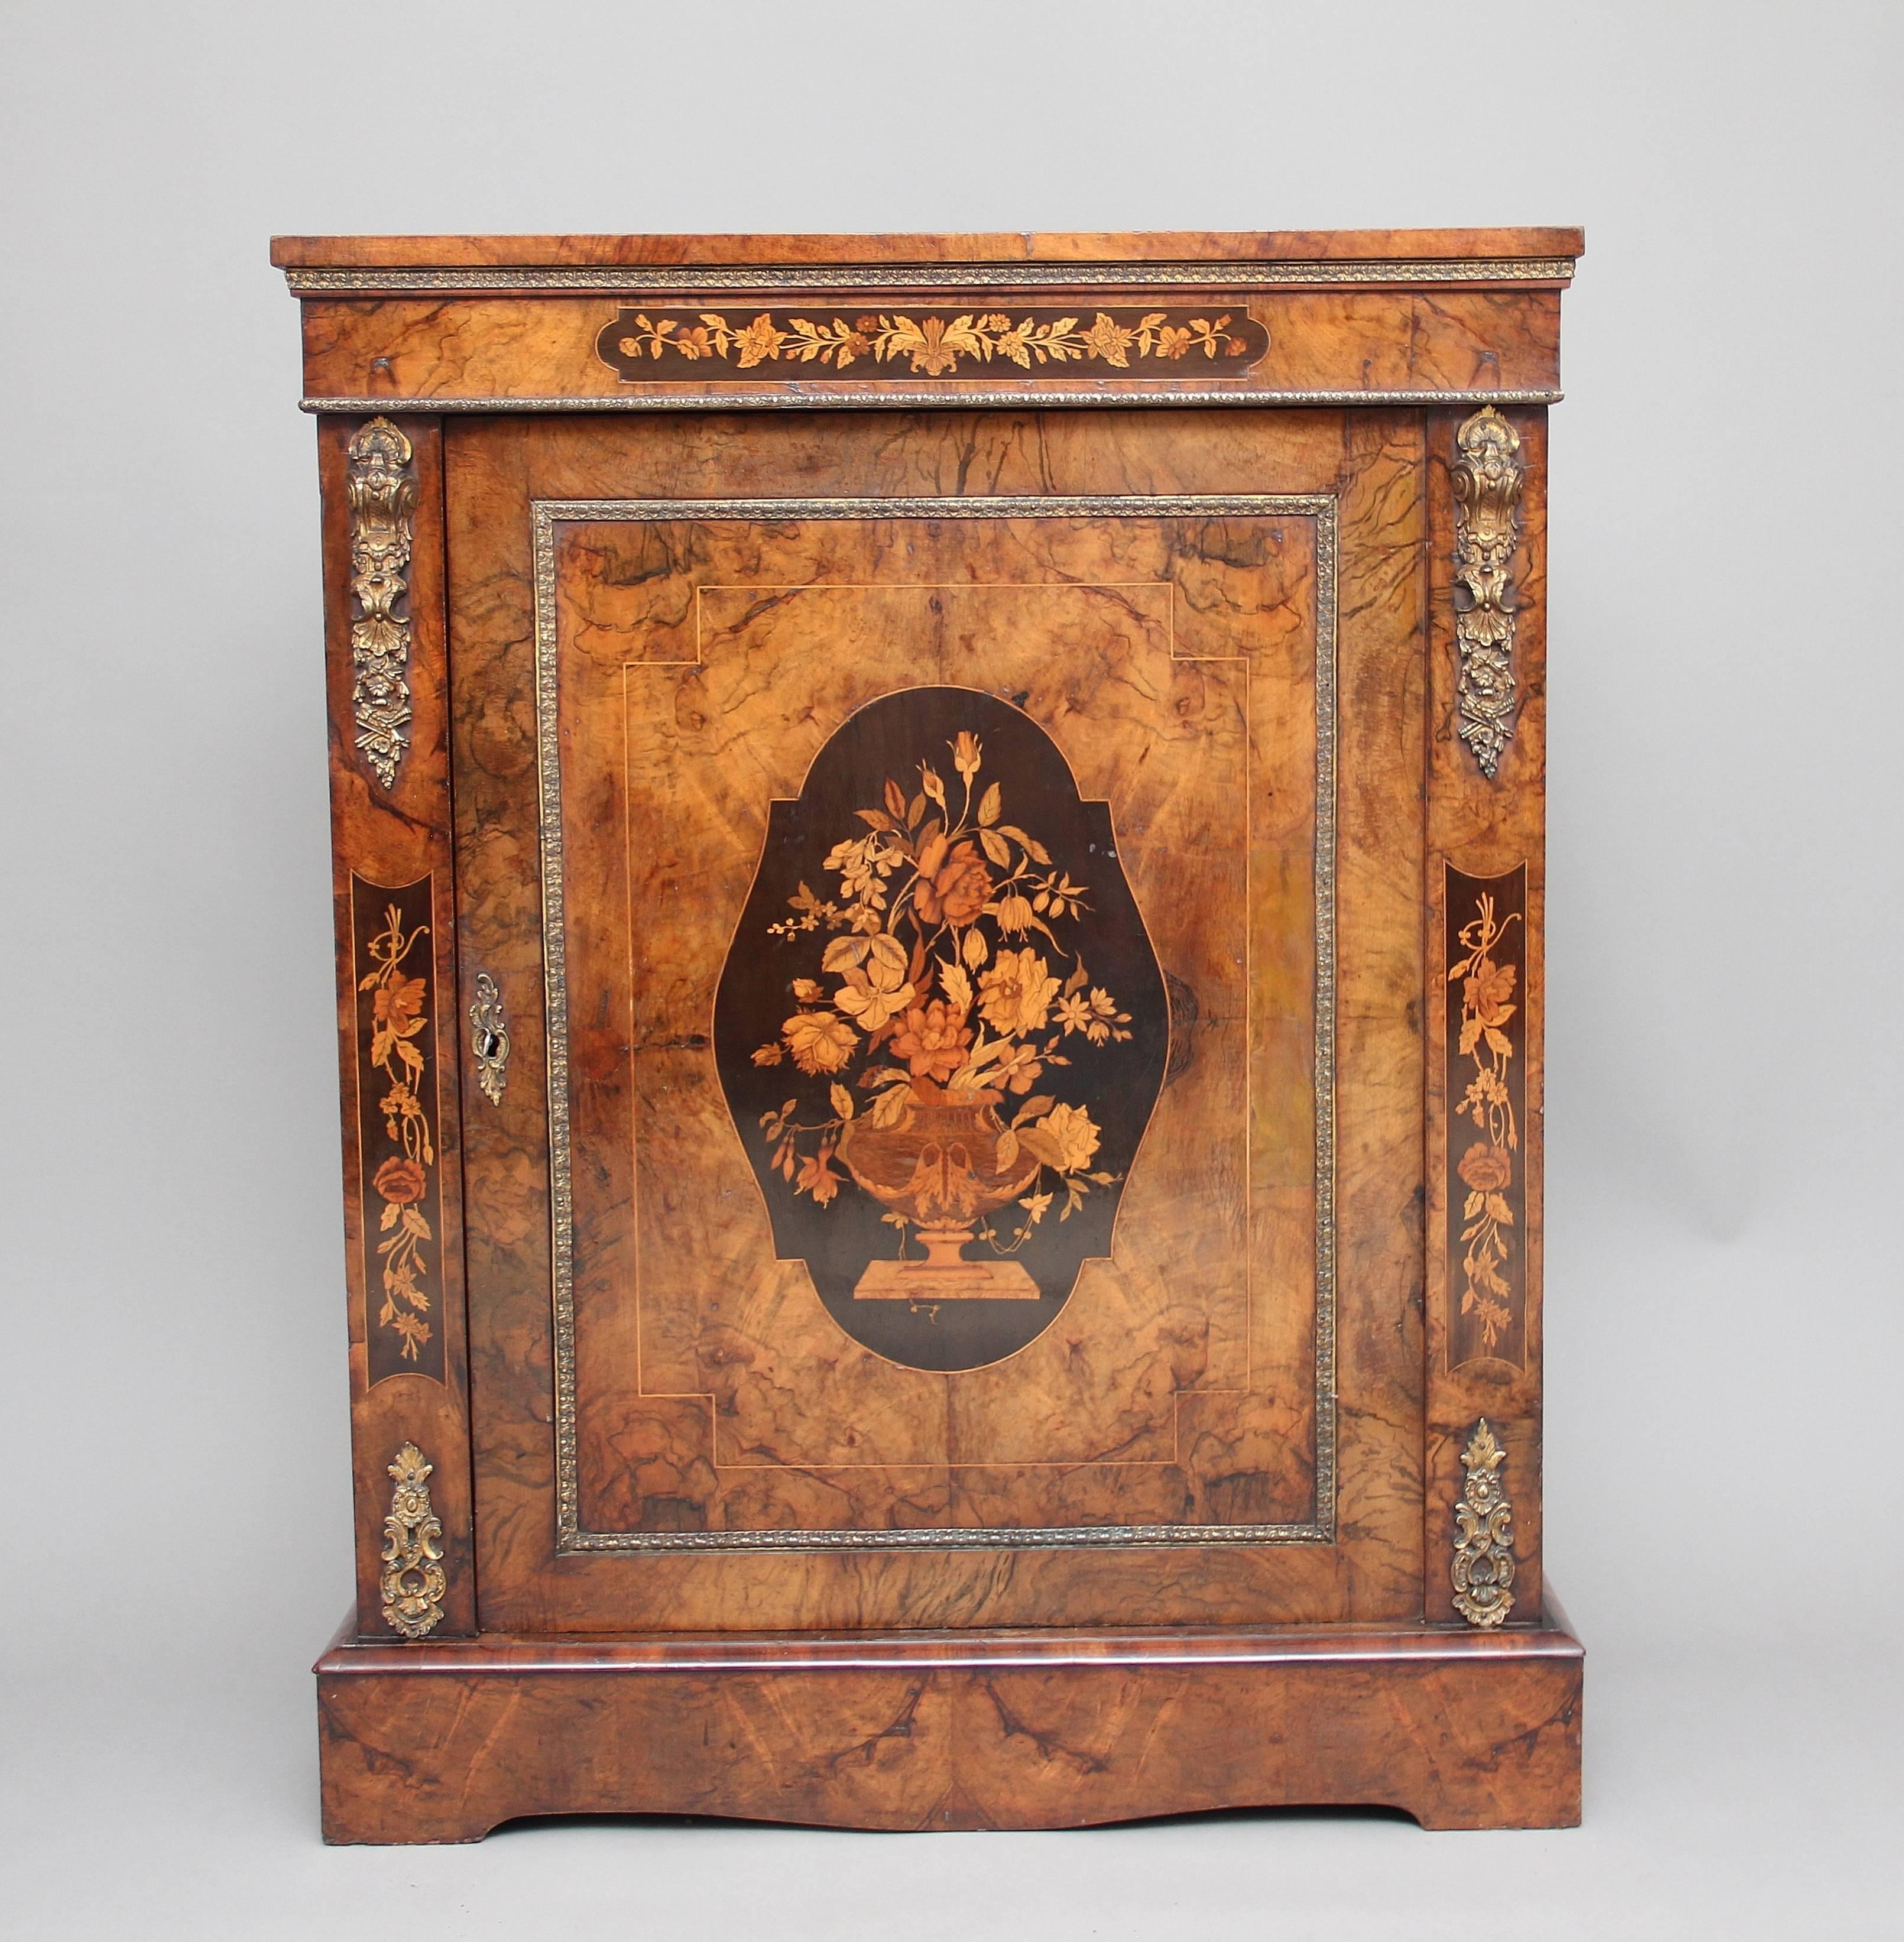 19th century burr walnut pier cabinet, superb quality burr walnut top above a frieze decorated with ormolu beading and an inlaid marquetry panel of floral design, the single door having a large inlaid marquetry panel at the centre with ormolu